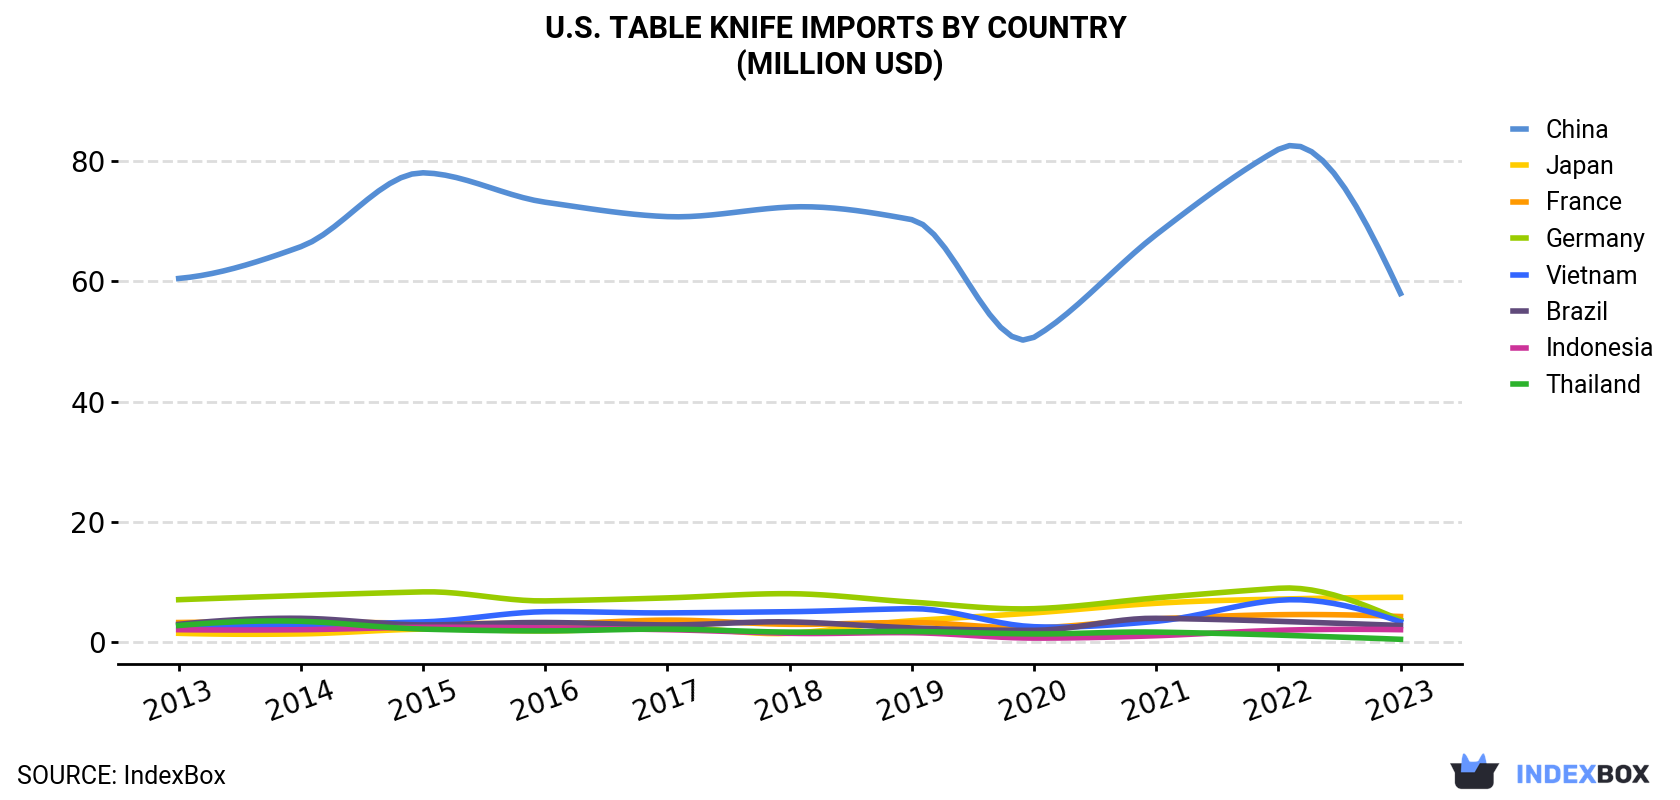 U.S. Table Knife Imports By Country (Million USD)